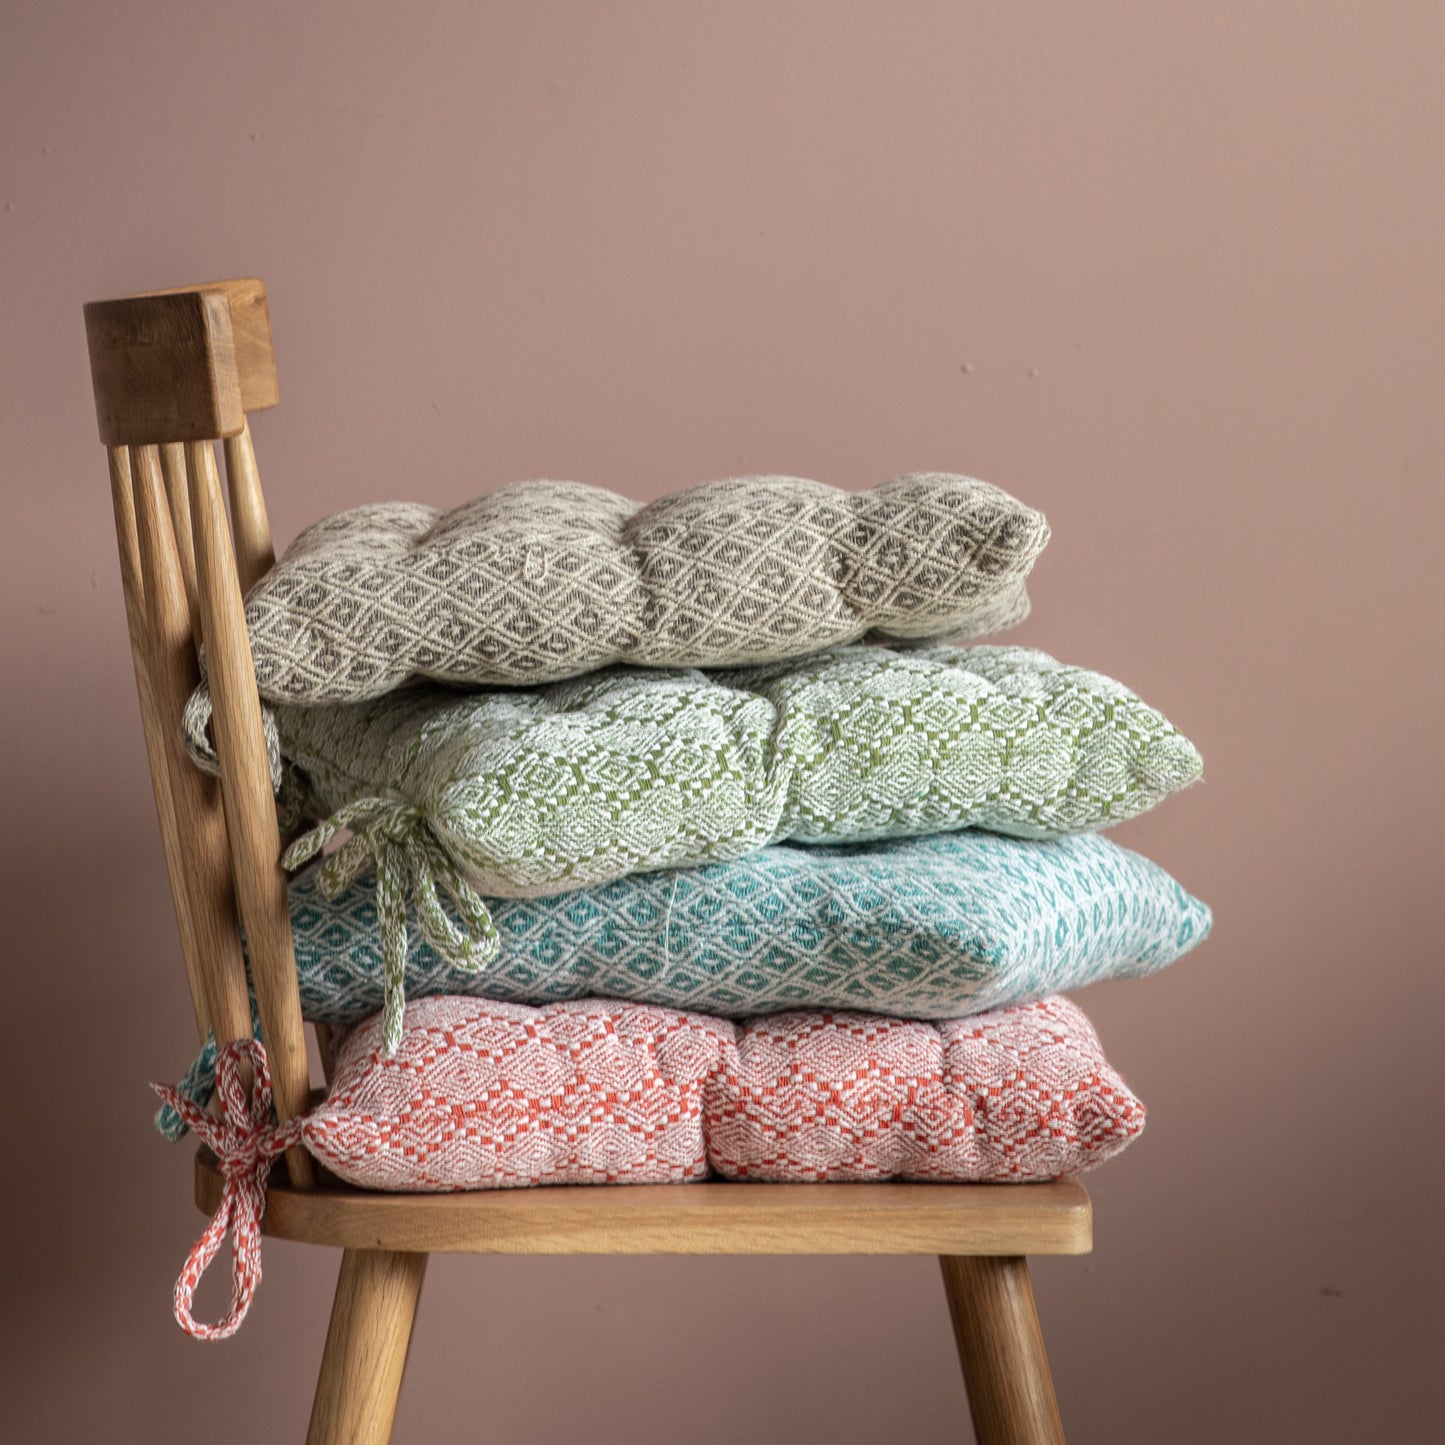 A stack of taupe seatpad pillows on a wooden chair from Kikiathome.co.uk, adding style to your home furniture.